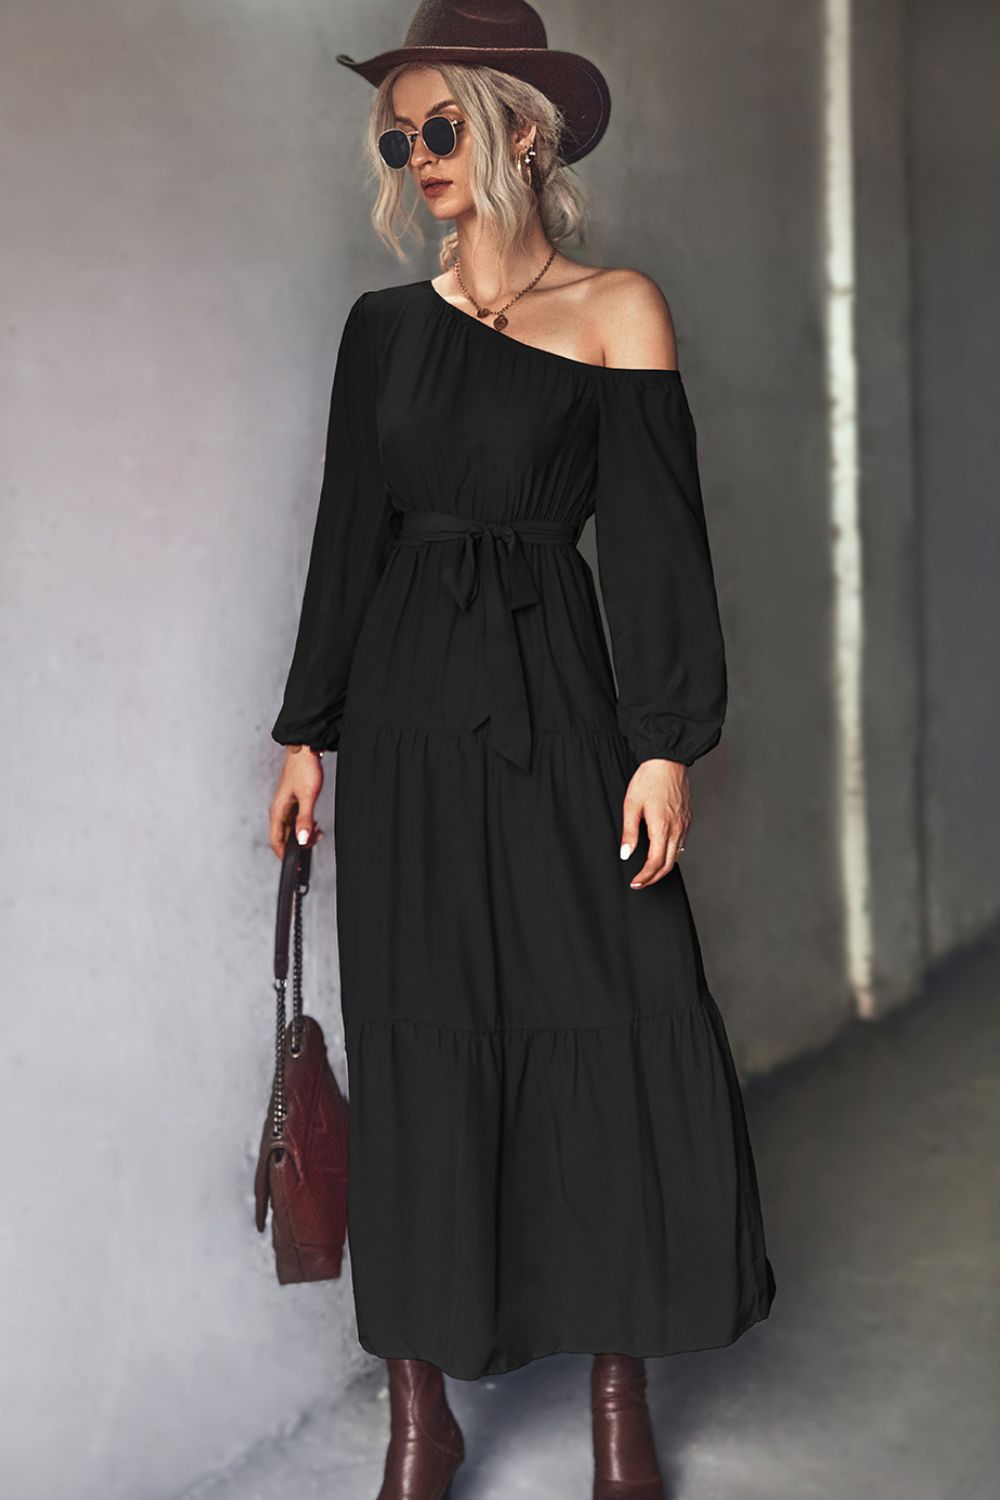 Belted One-Shoulder Tiered Maxi Dress - Black / S Apparel & Accessories Girl Code